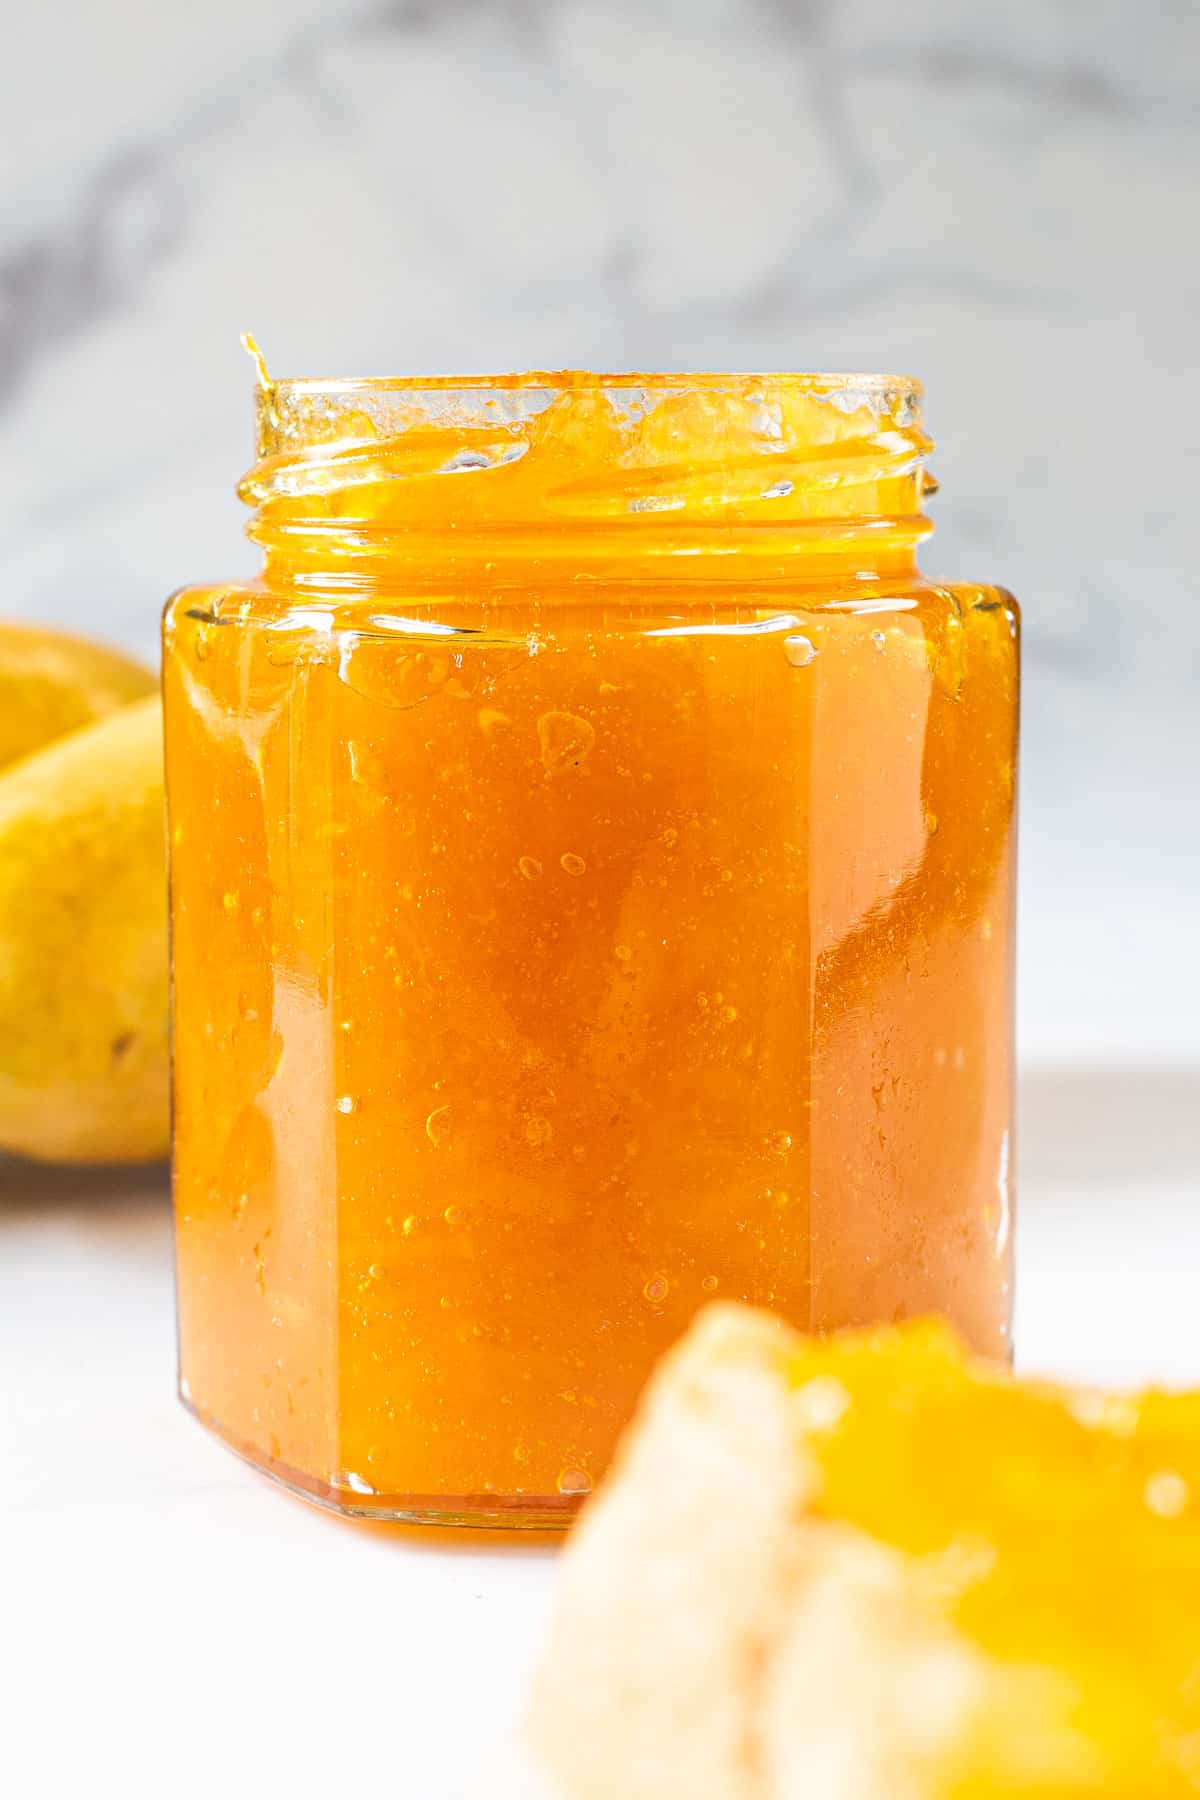 A jar of mango jam with the lid open